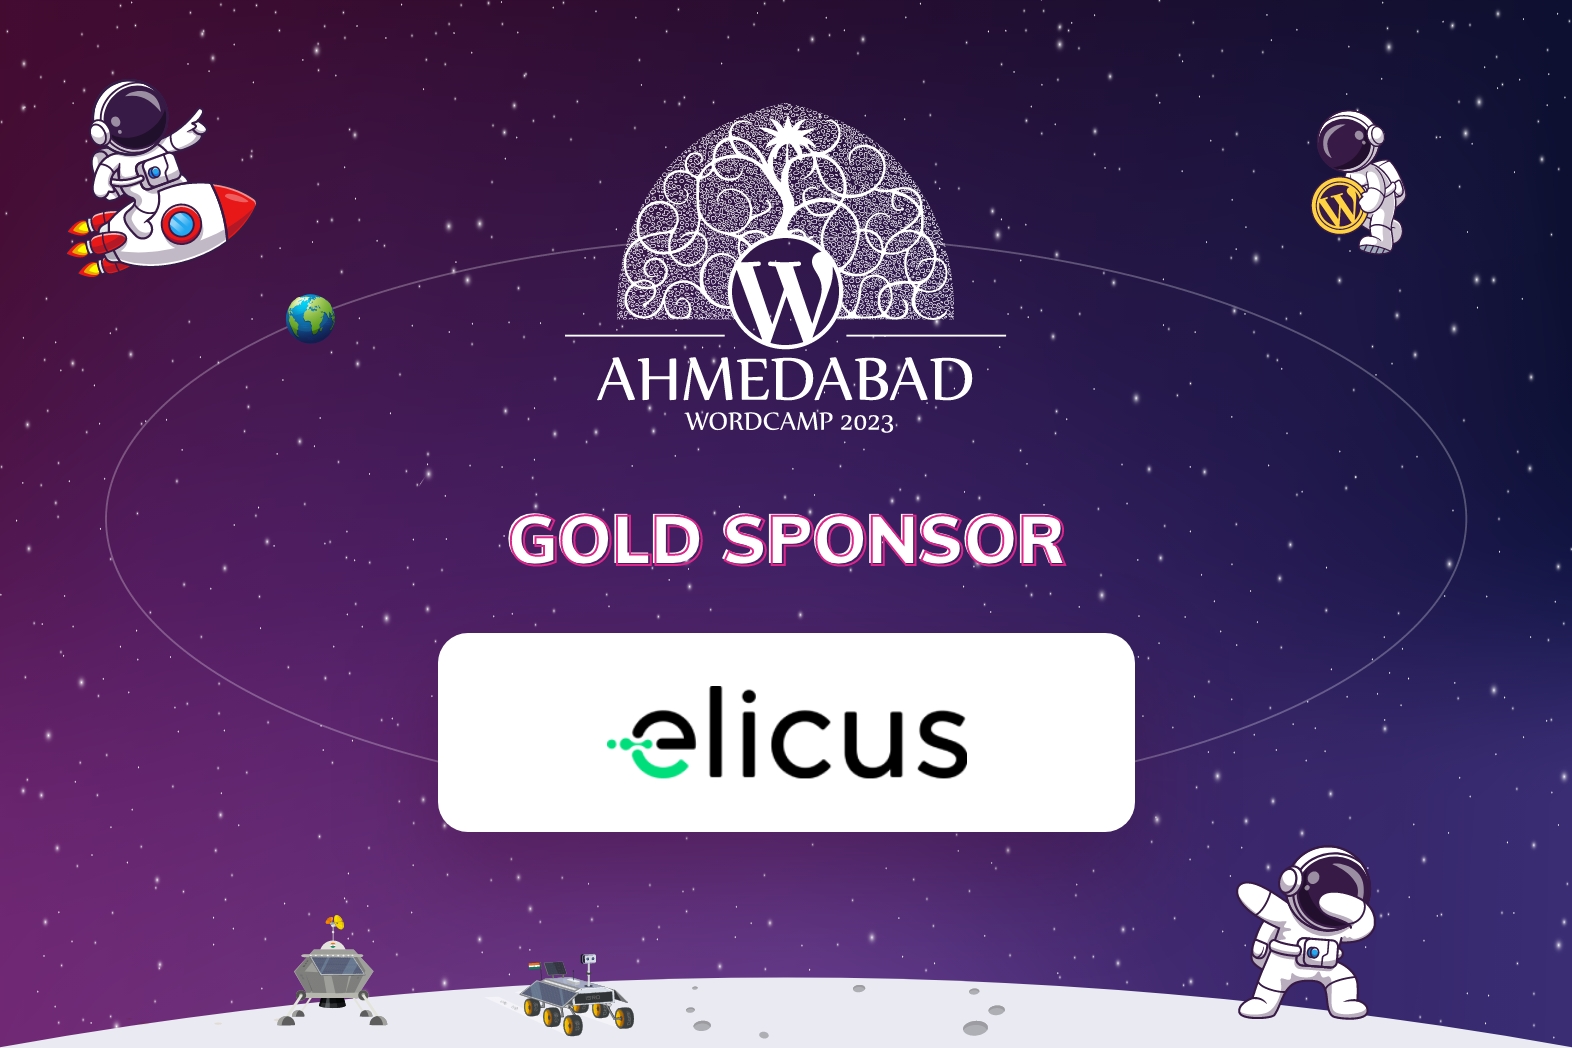 Thank you Elicus for being our Gold Sponsor